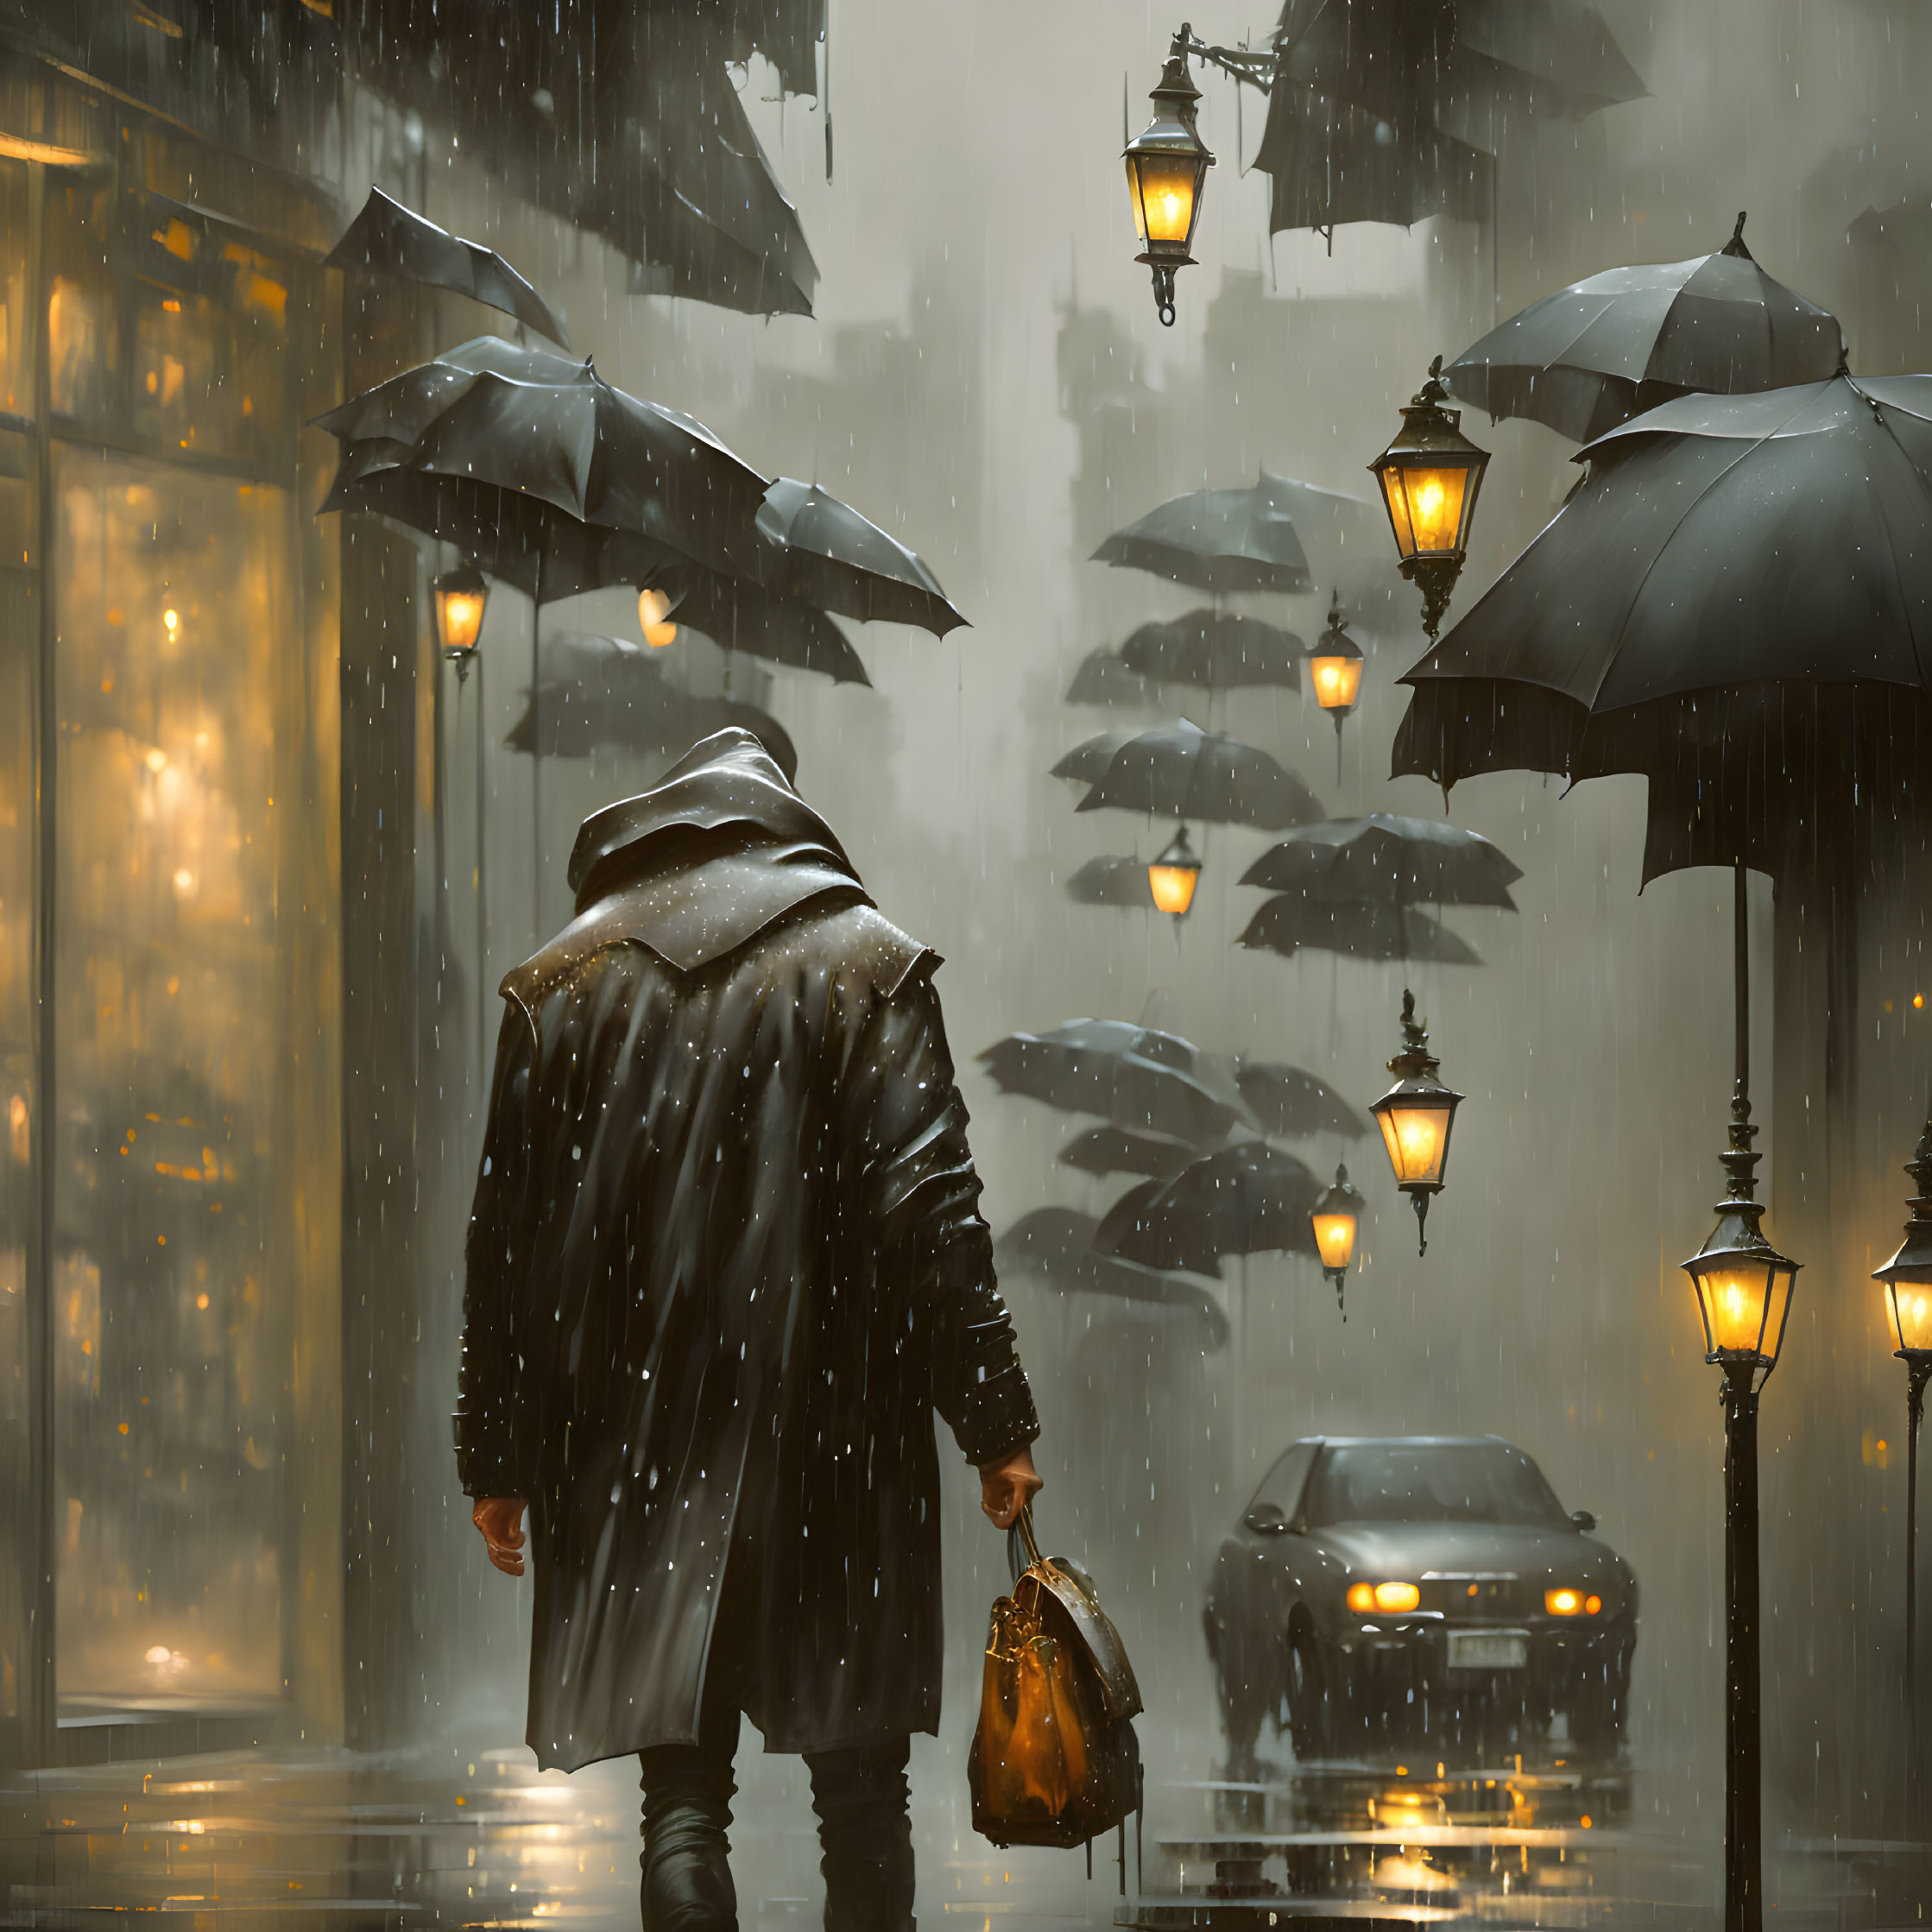 Person with umbrella walks in heavy rain under glowing street lamps among blurry cityscape.